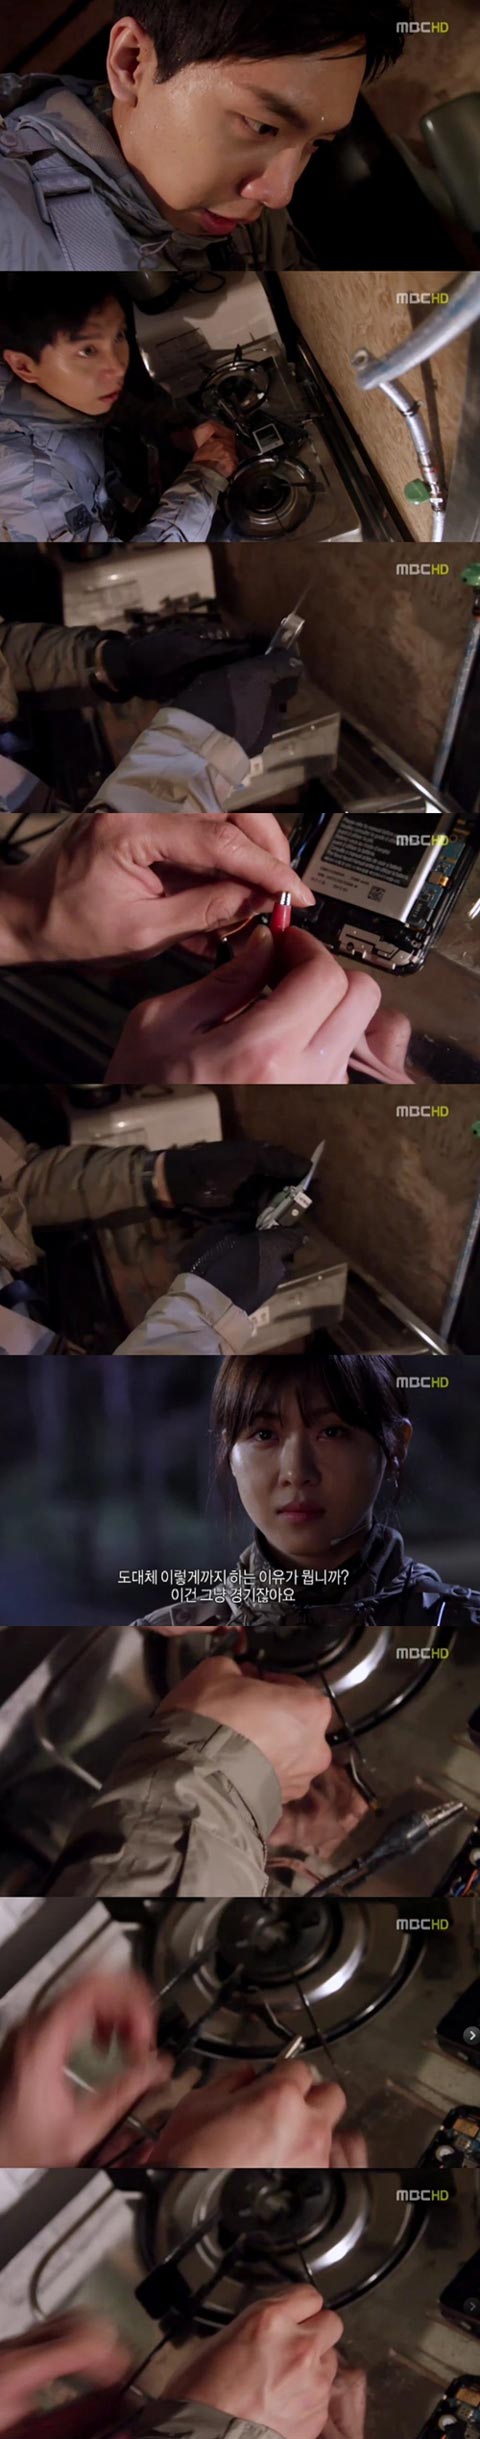 Lee Seung Gi Ultra Tension Explosive Preparation is Cliffhanging